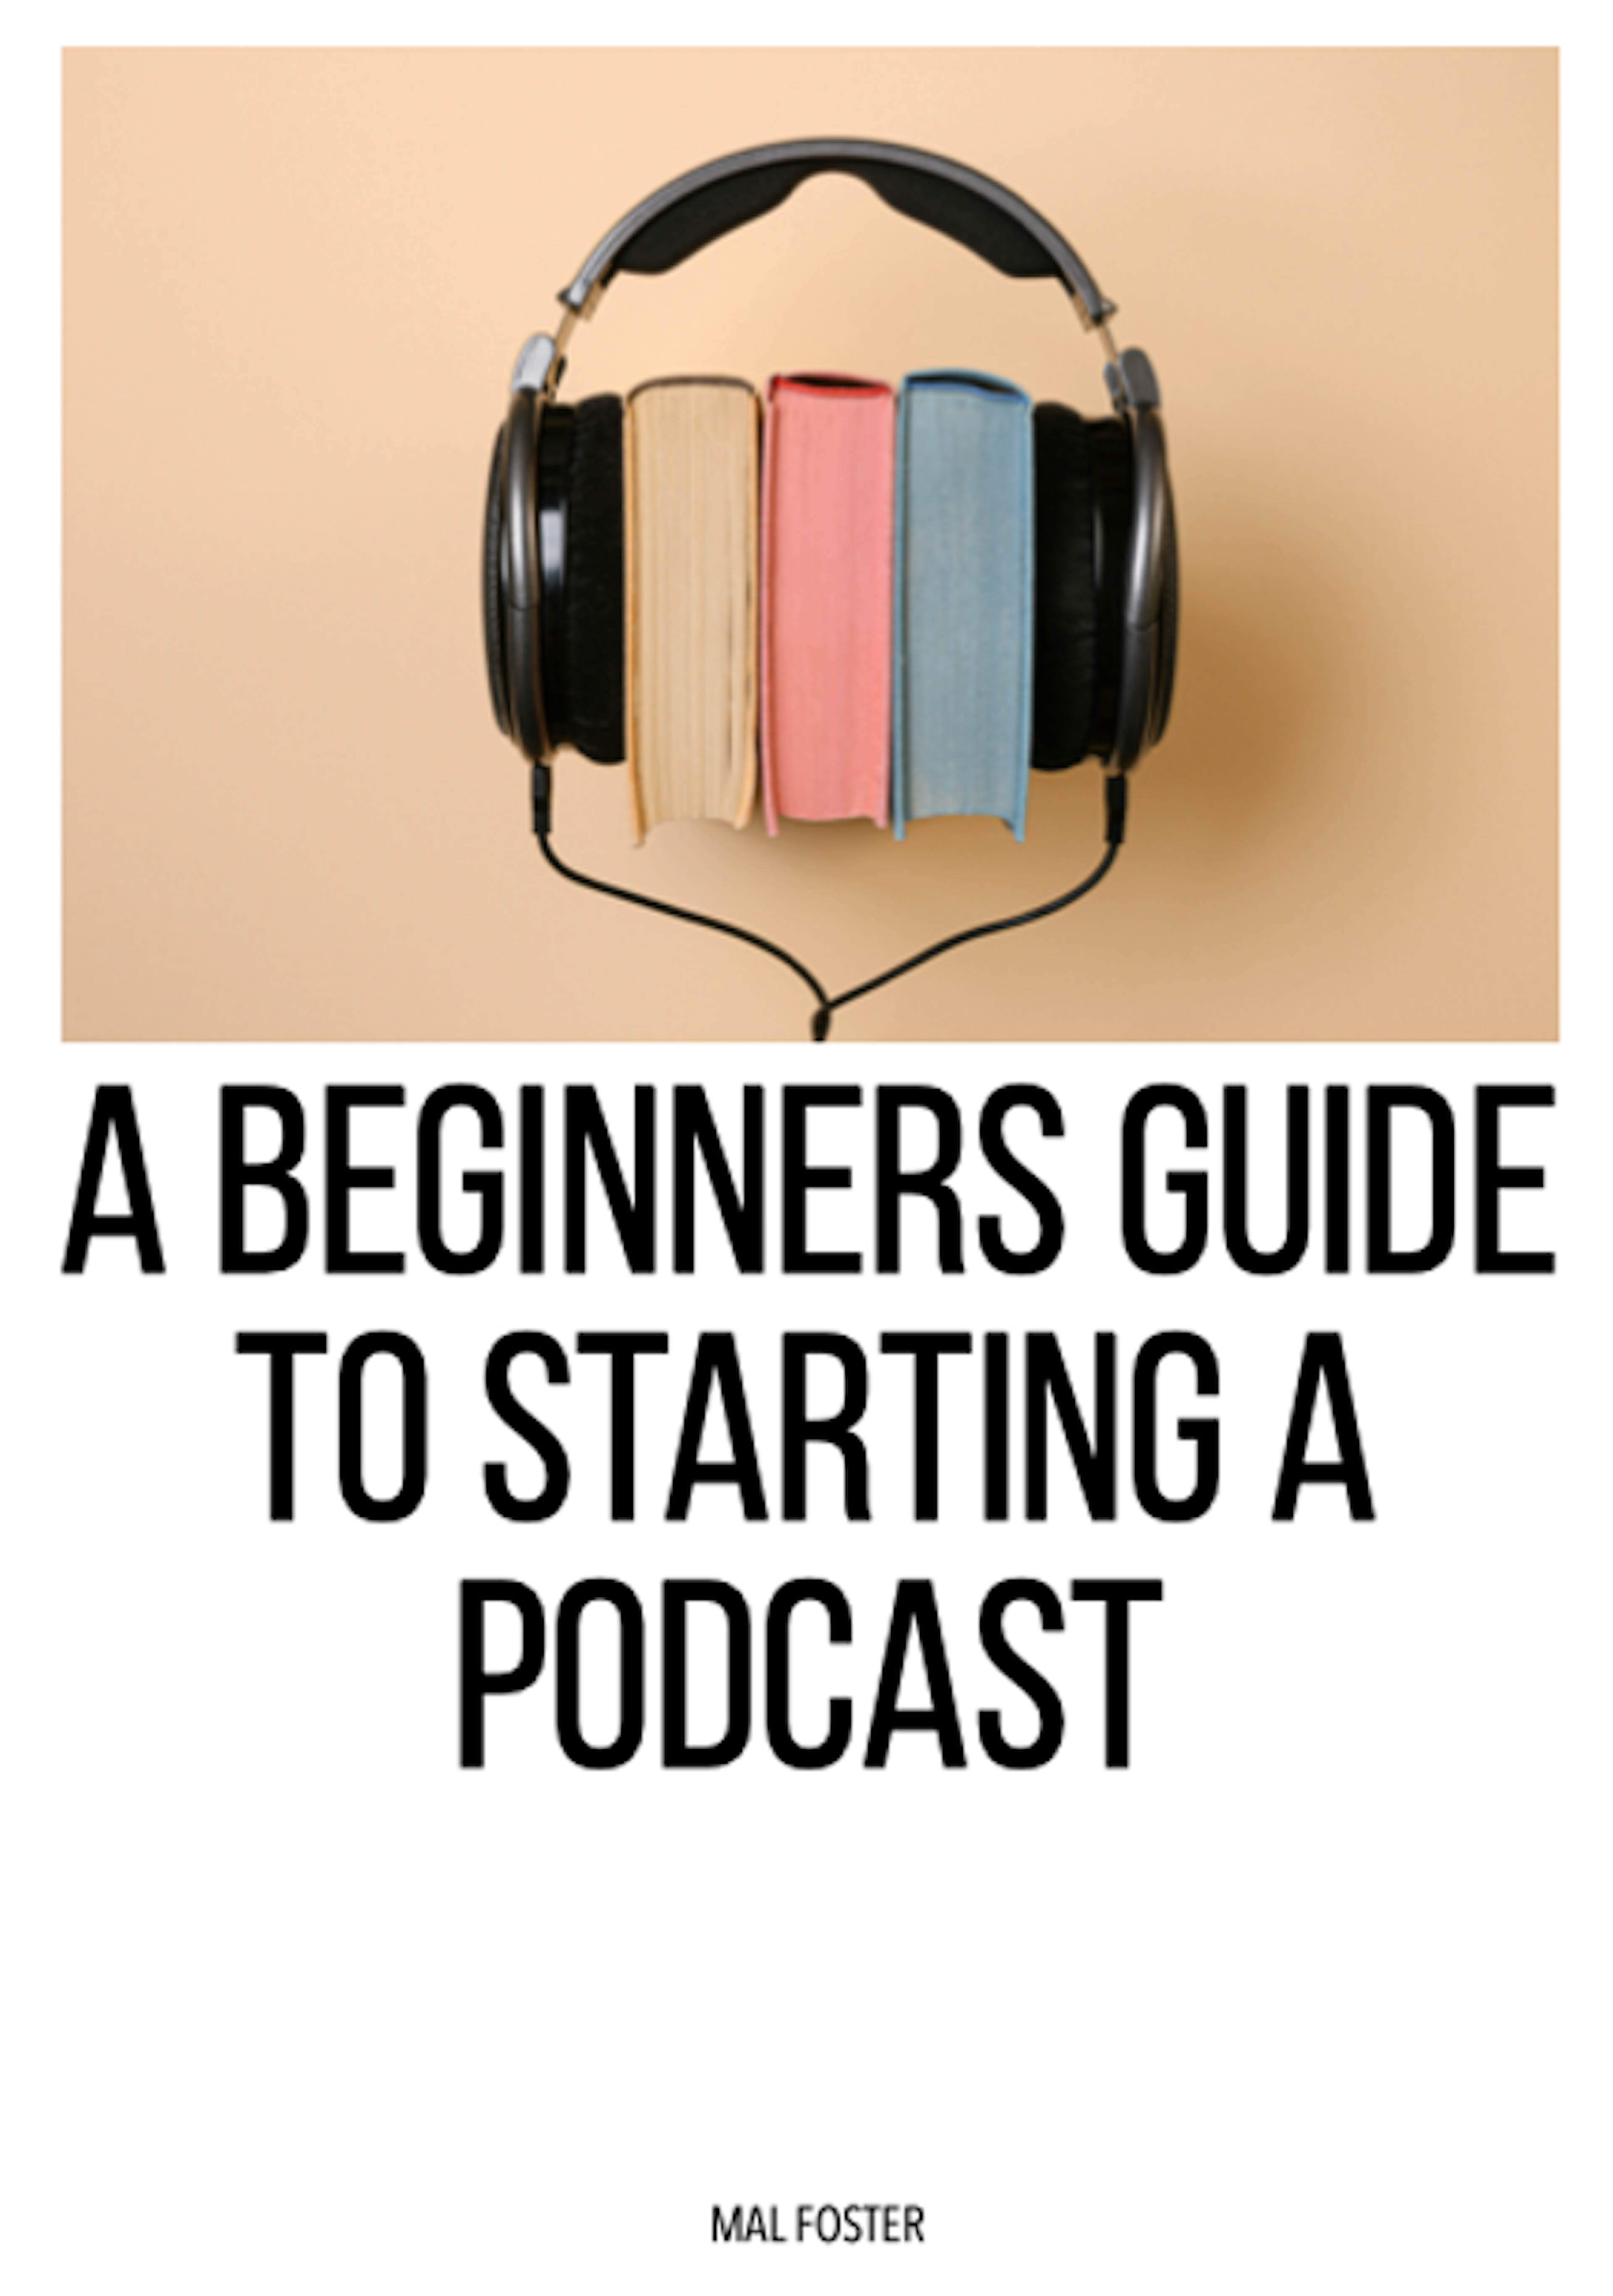 A Beginners Guide to Starting a Podcast